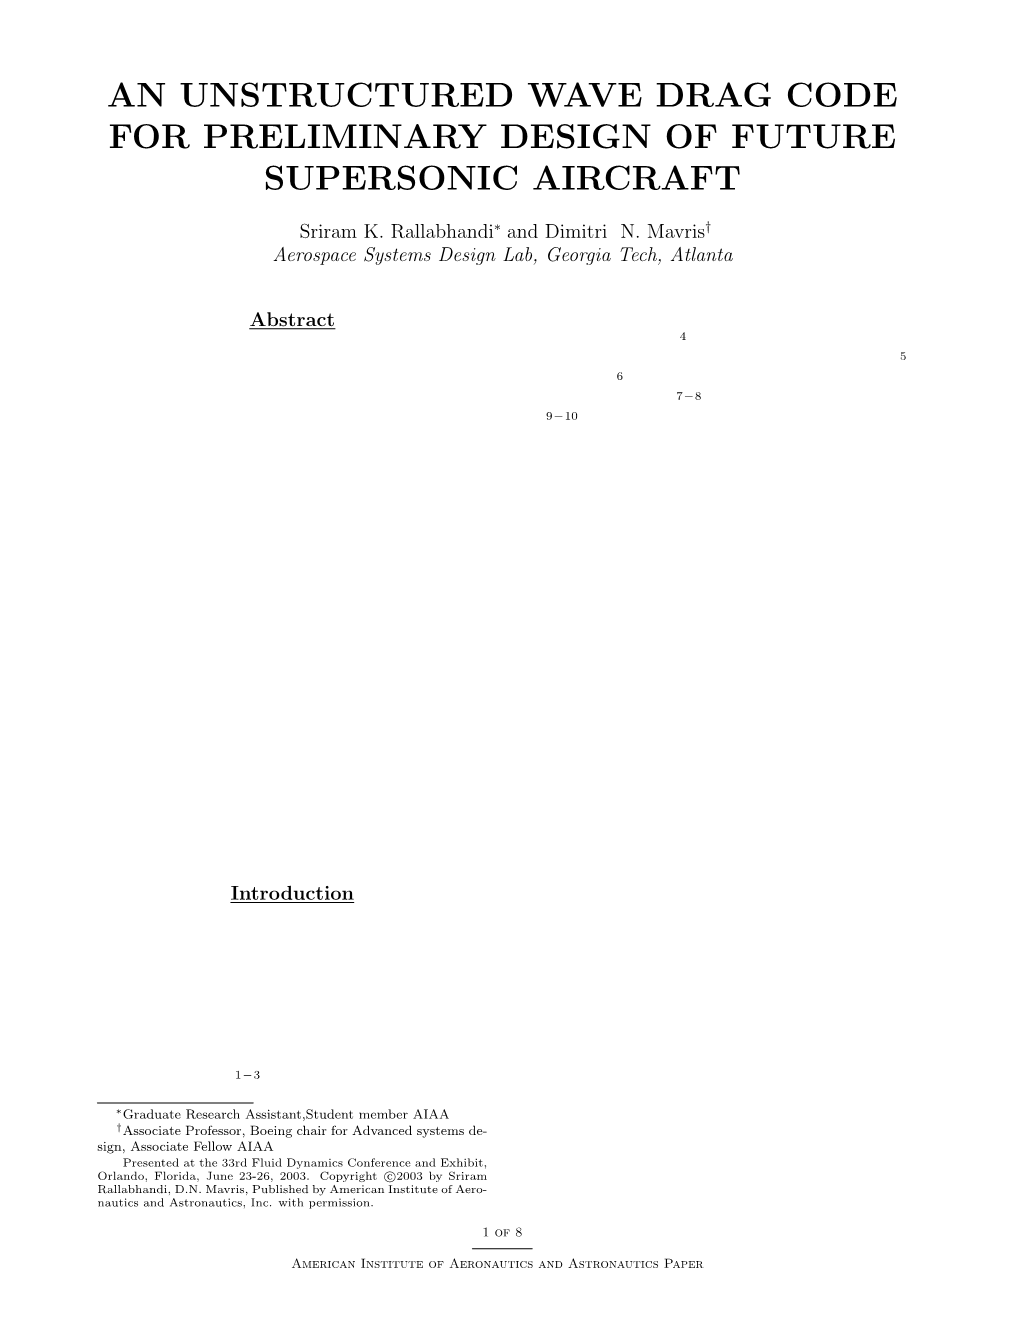 An Unstructured Wave Drag Code for Preliminary Design of Future Supersonic Aircraft